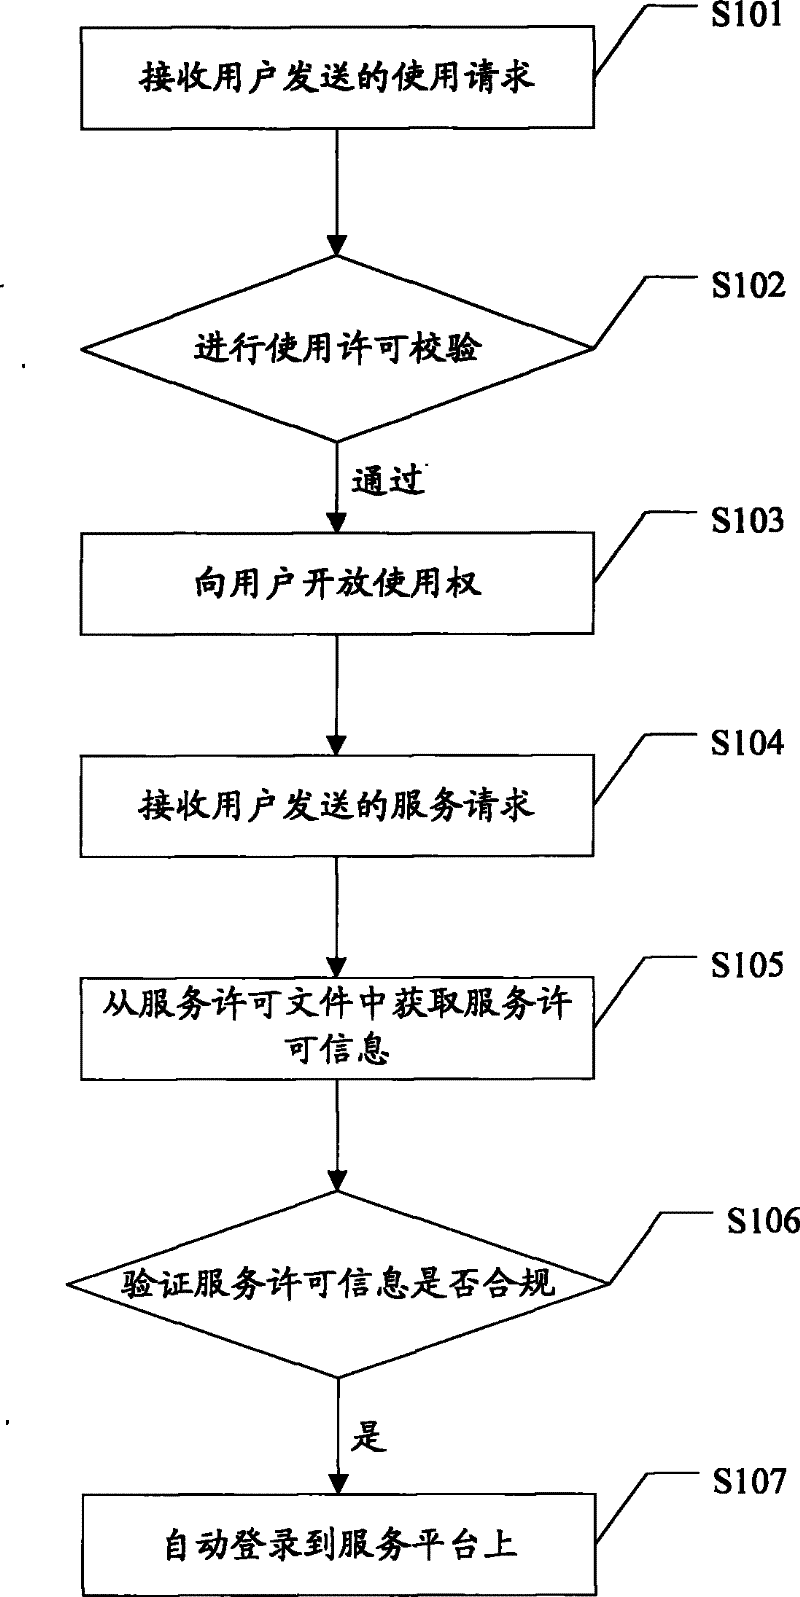 Method for realizing use license and service license and certification device